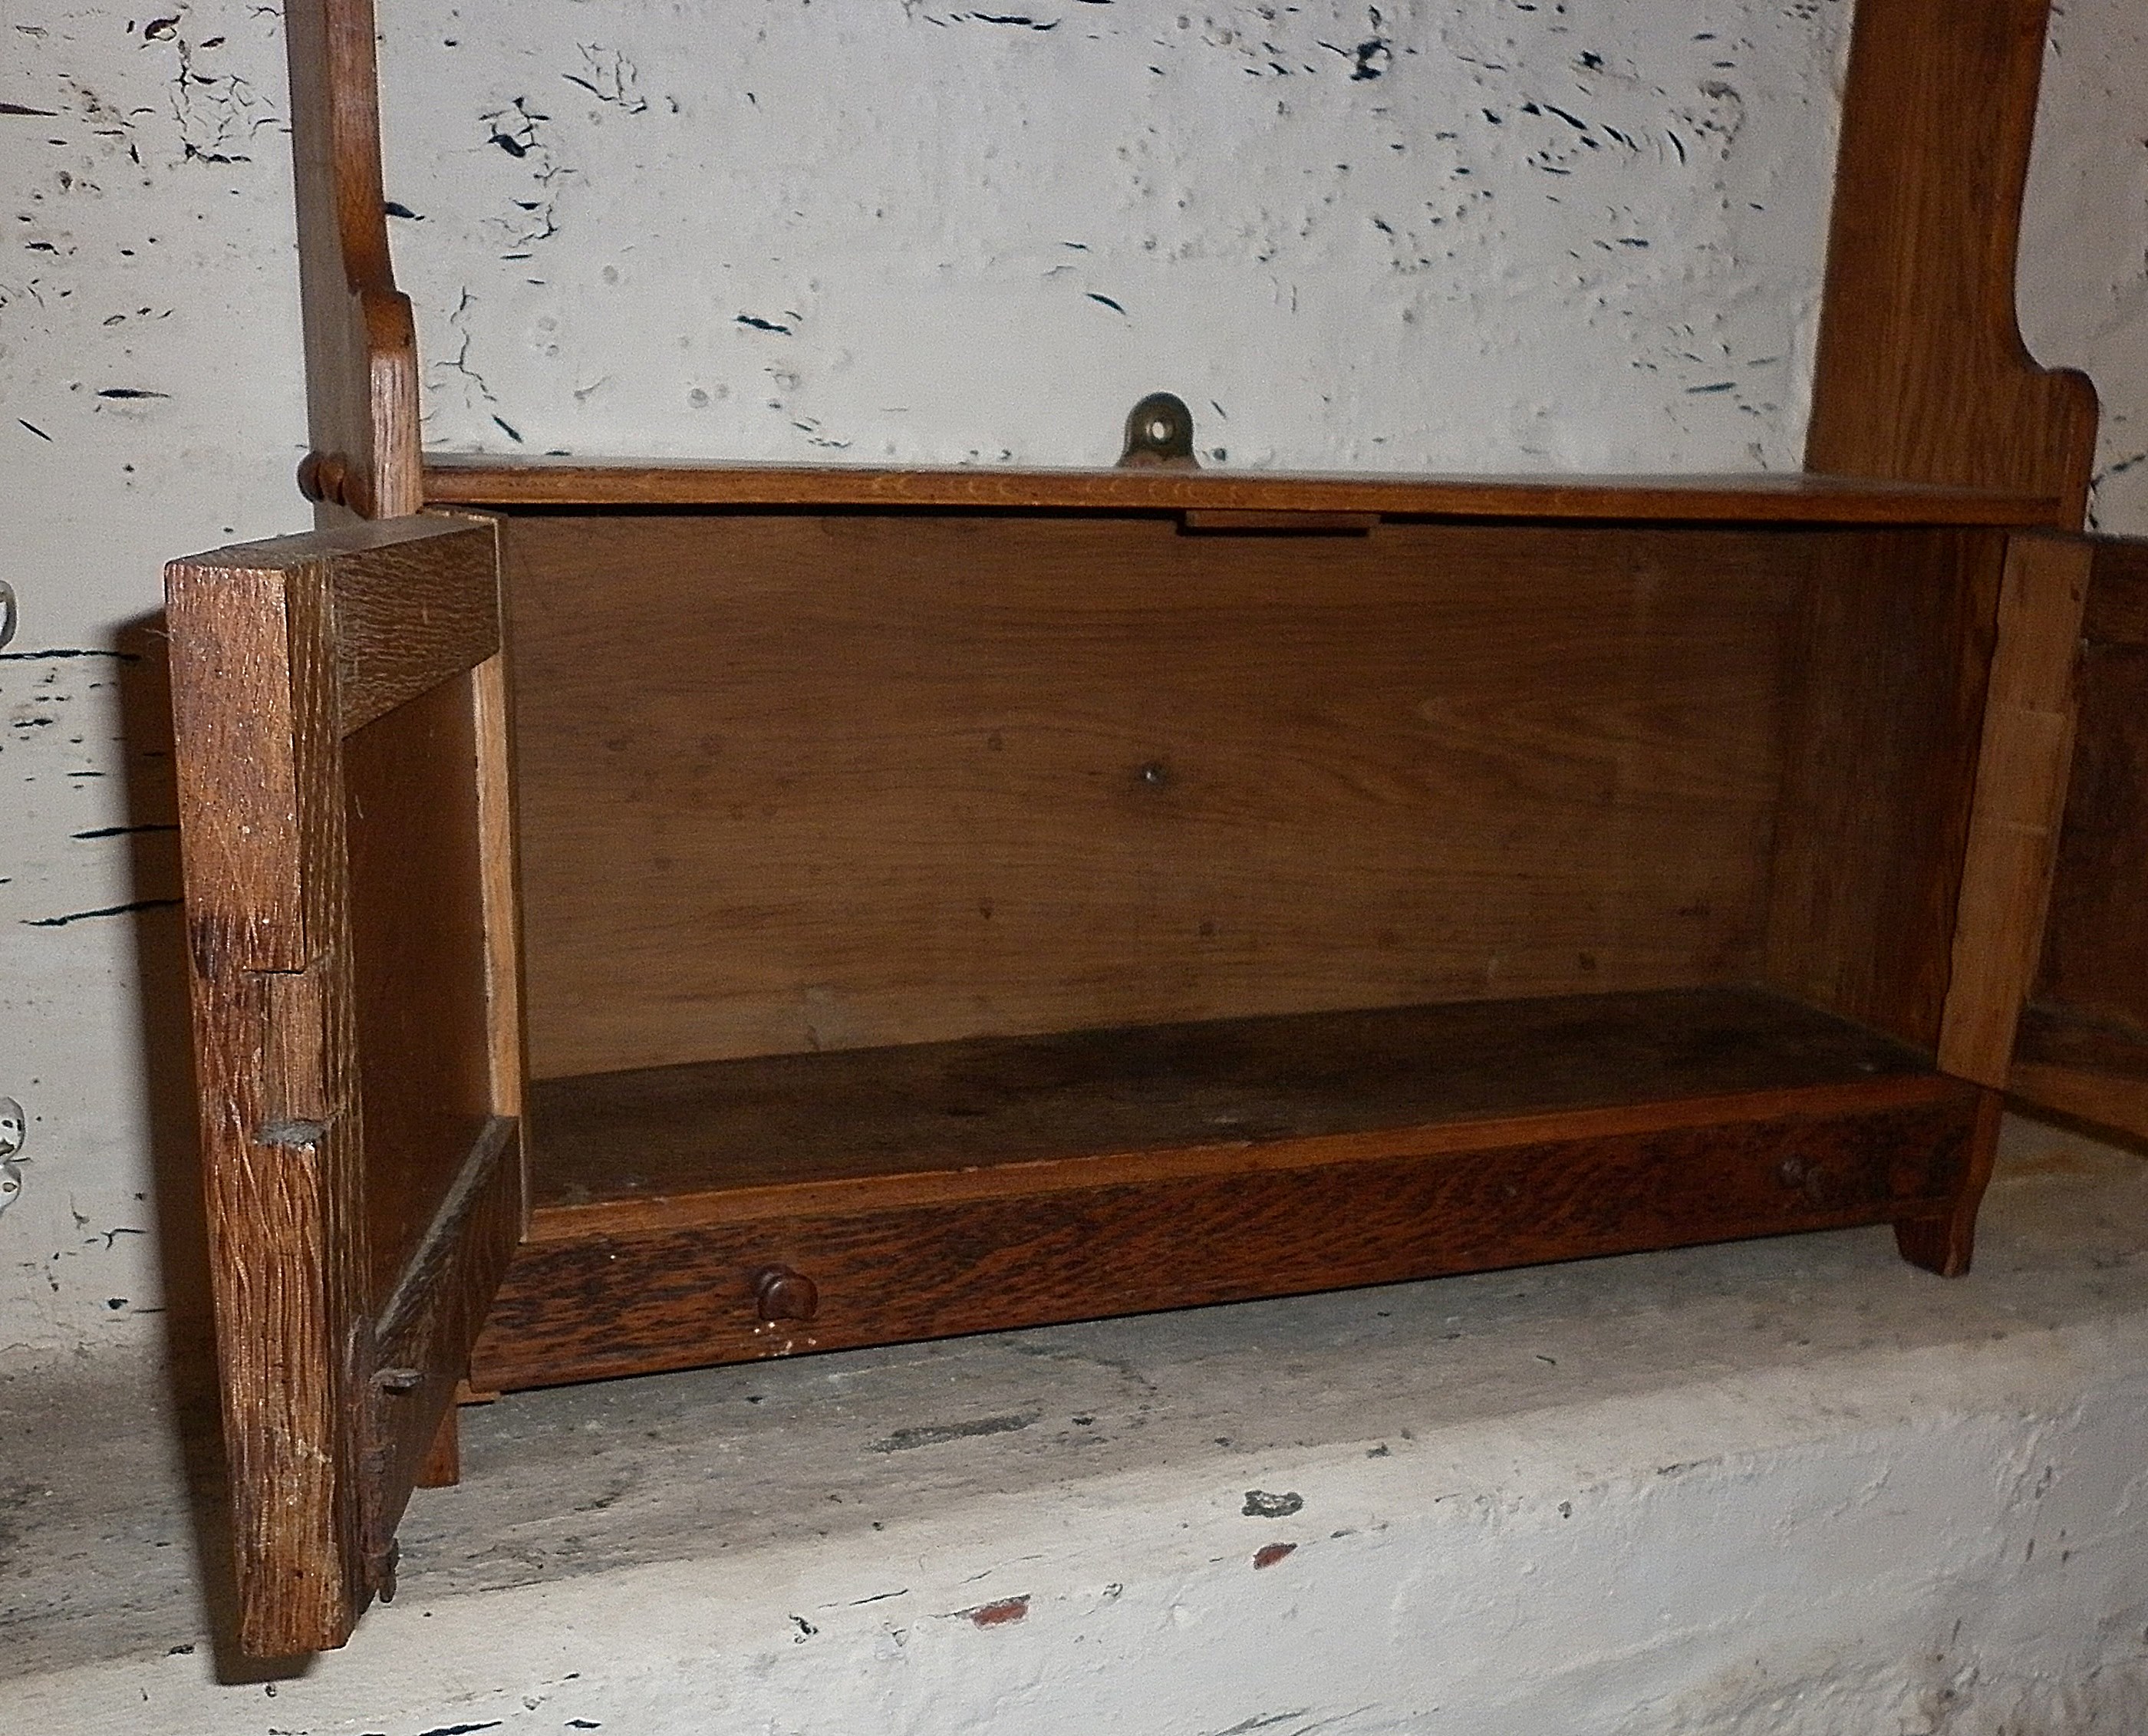 Victorian two-door wall shelf cupboard with turned gallery - Image 2 of 2